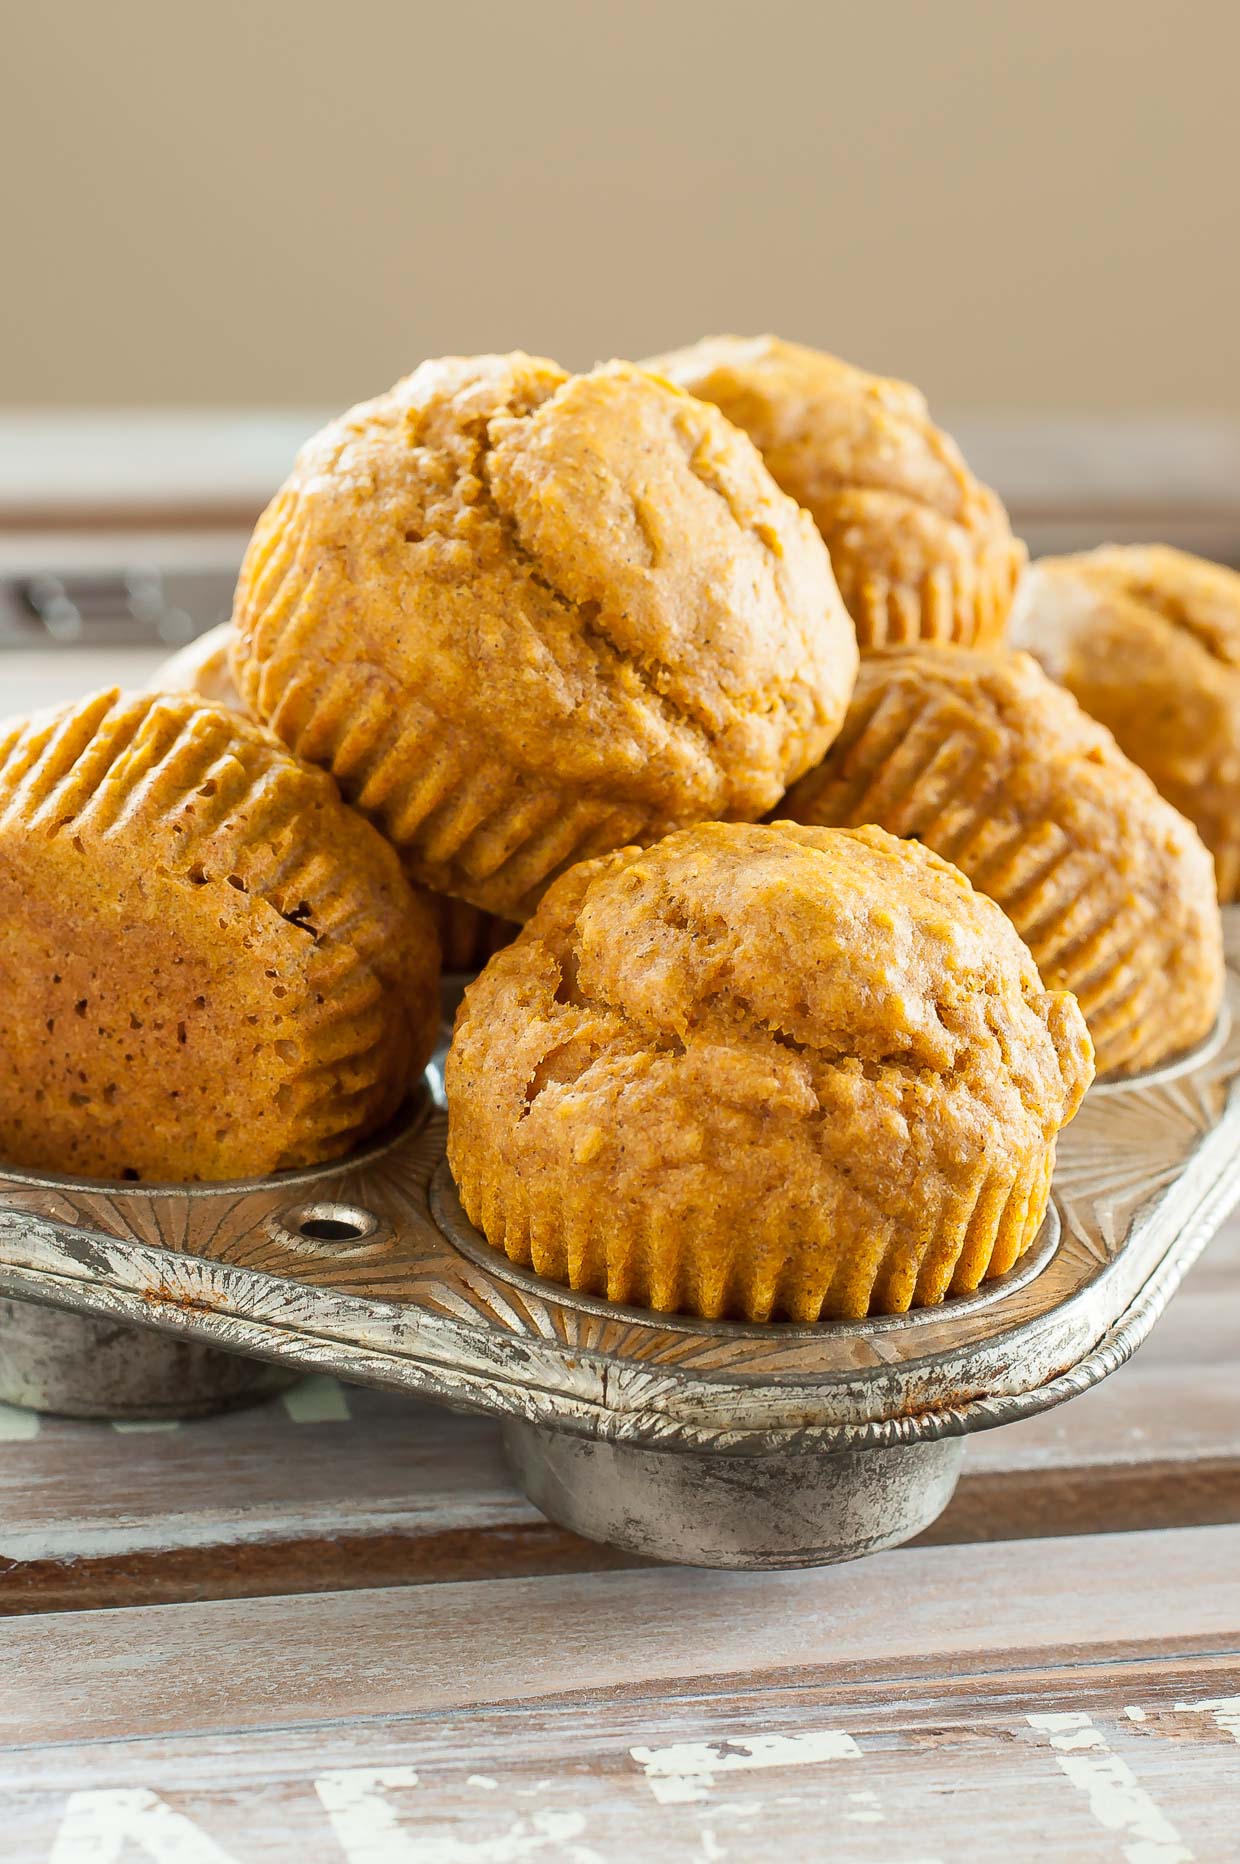 We love making these kid-friendly pumpkin muffins. They're super simple, gloriously healthy, and sweetened naturally with maple syrup!